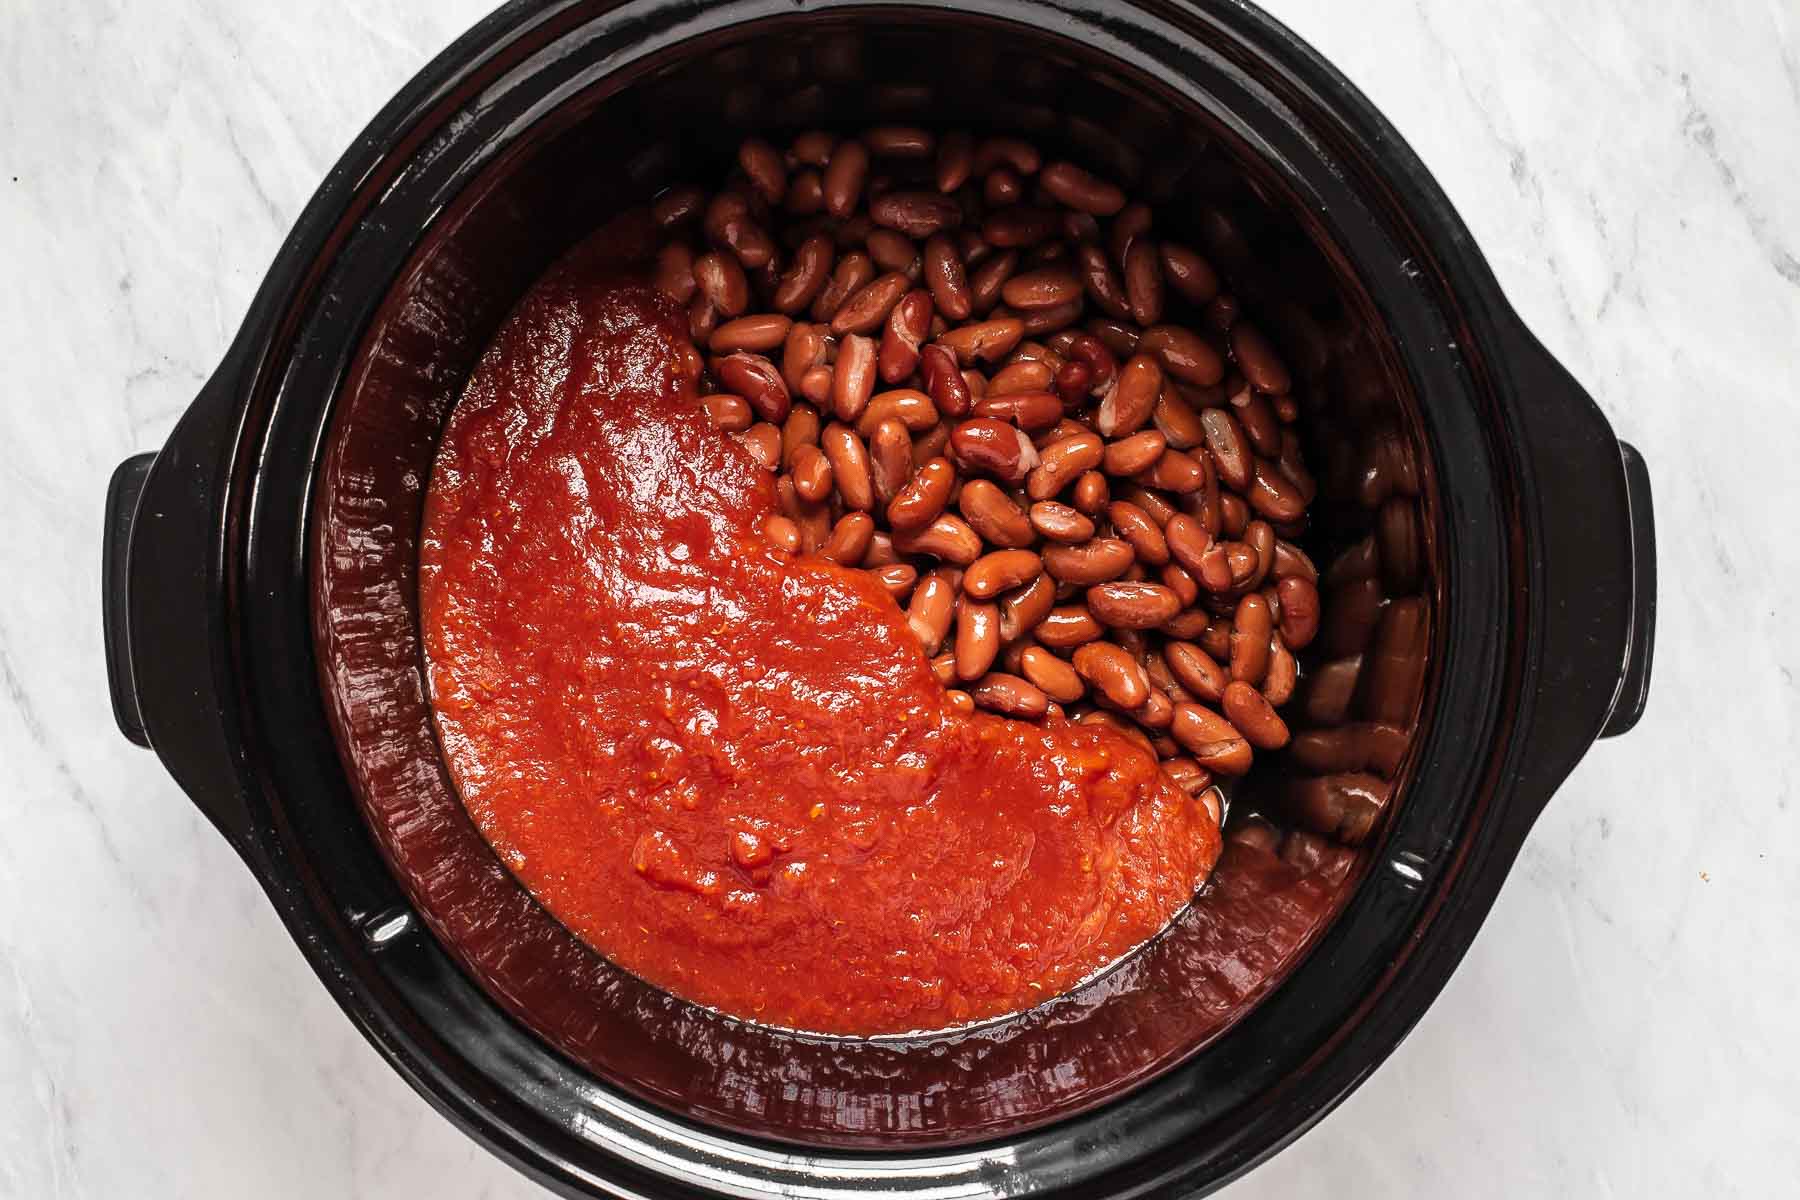 Tomatoes and kidney beans in slow cooker.